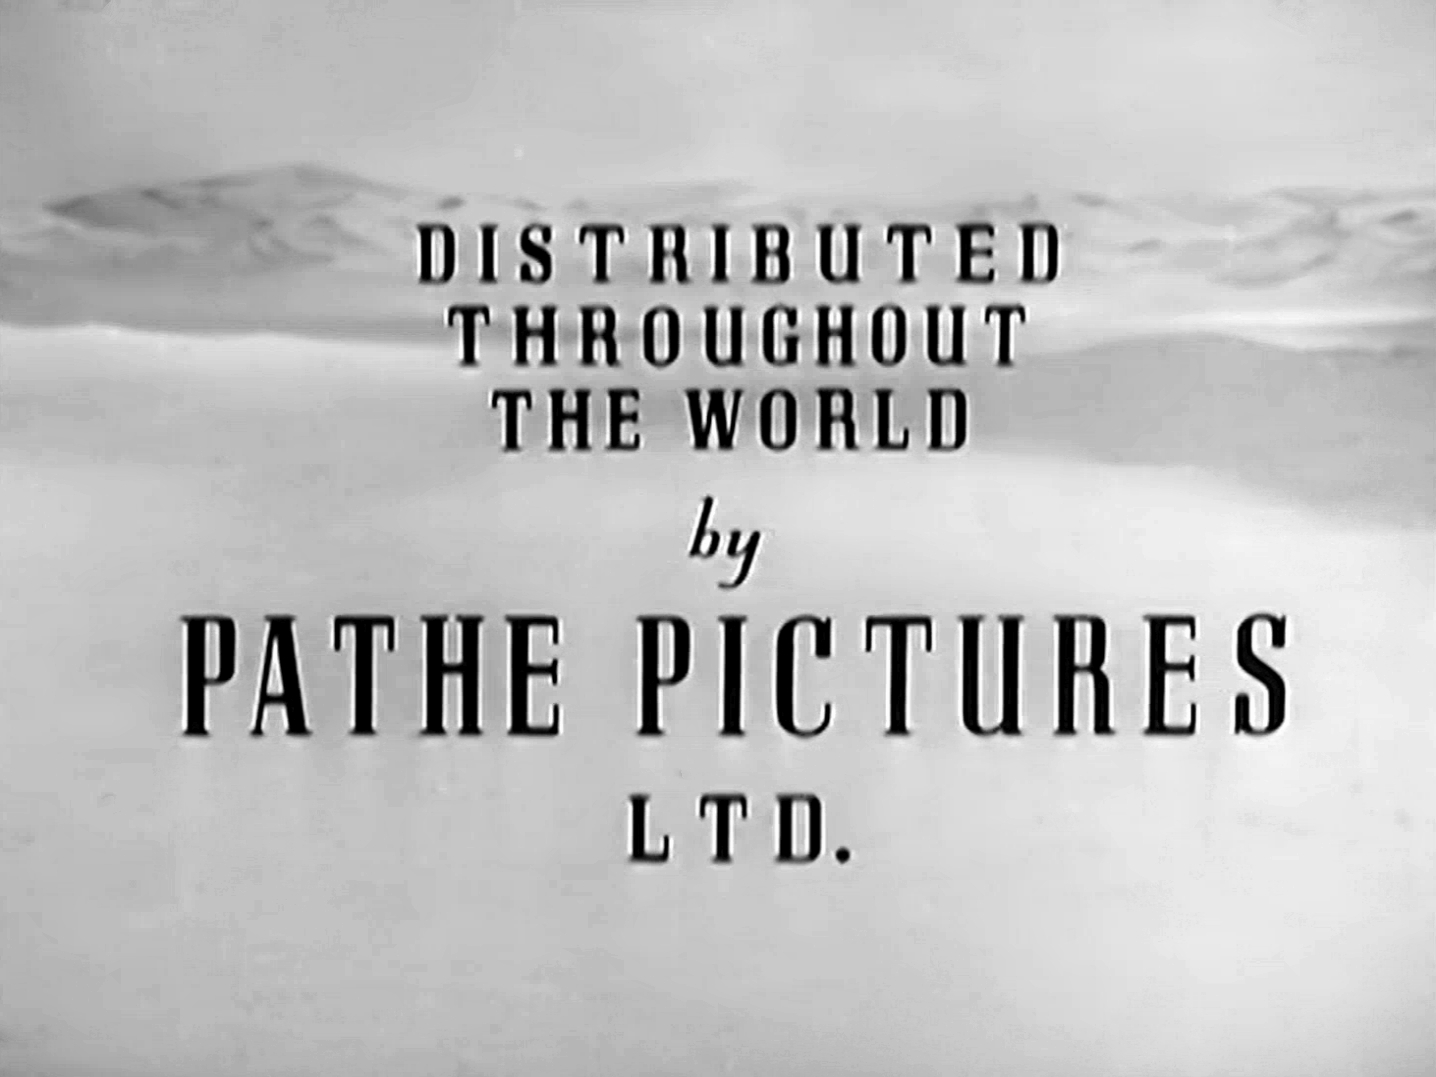 Main title from The Man from Morocco (1945) (12). Distributed throughout the world by Pathé Pictures Ltd.